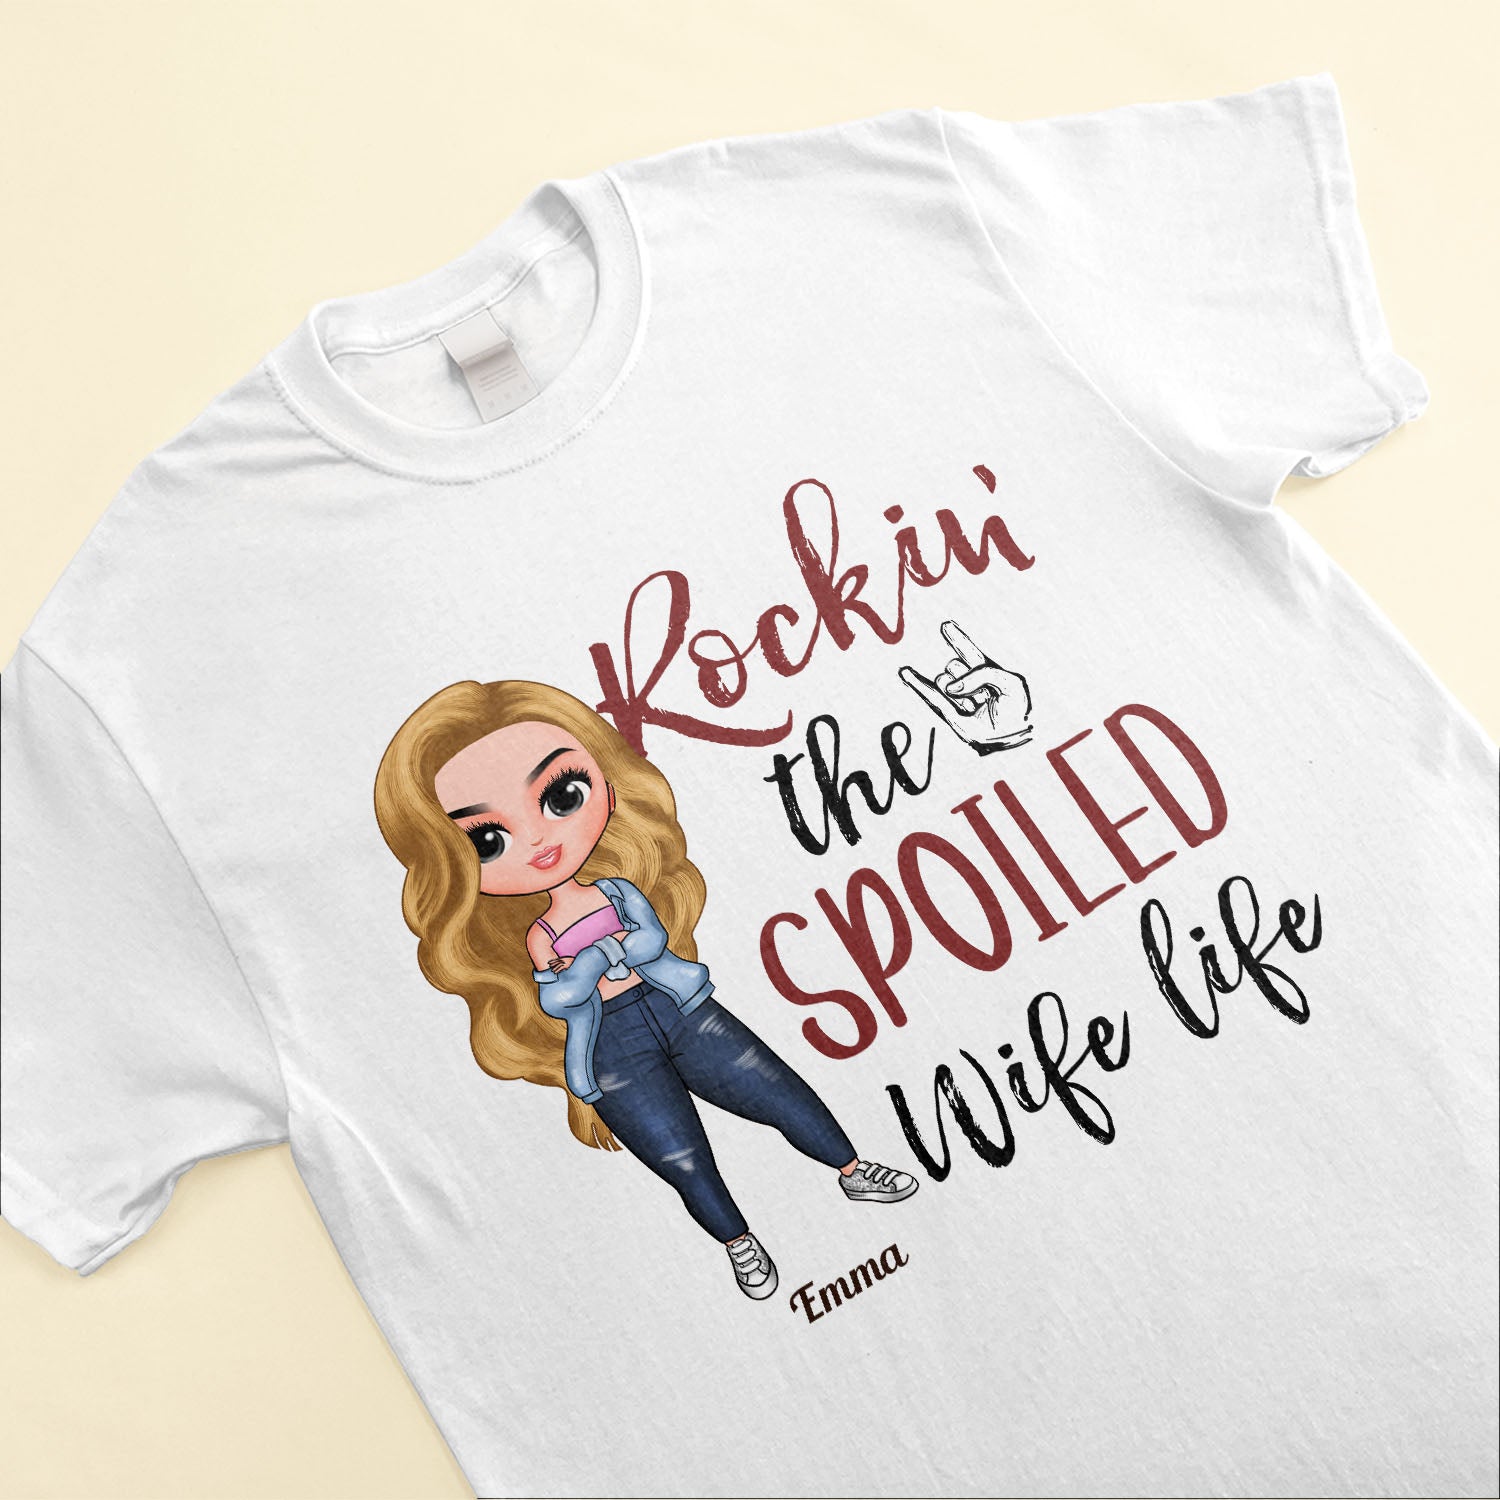 Rockin' Spoiled Wife Life - Personalize Shirt - Birtday Valentine Gift For Wife